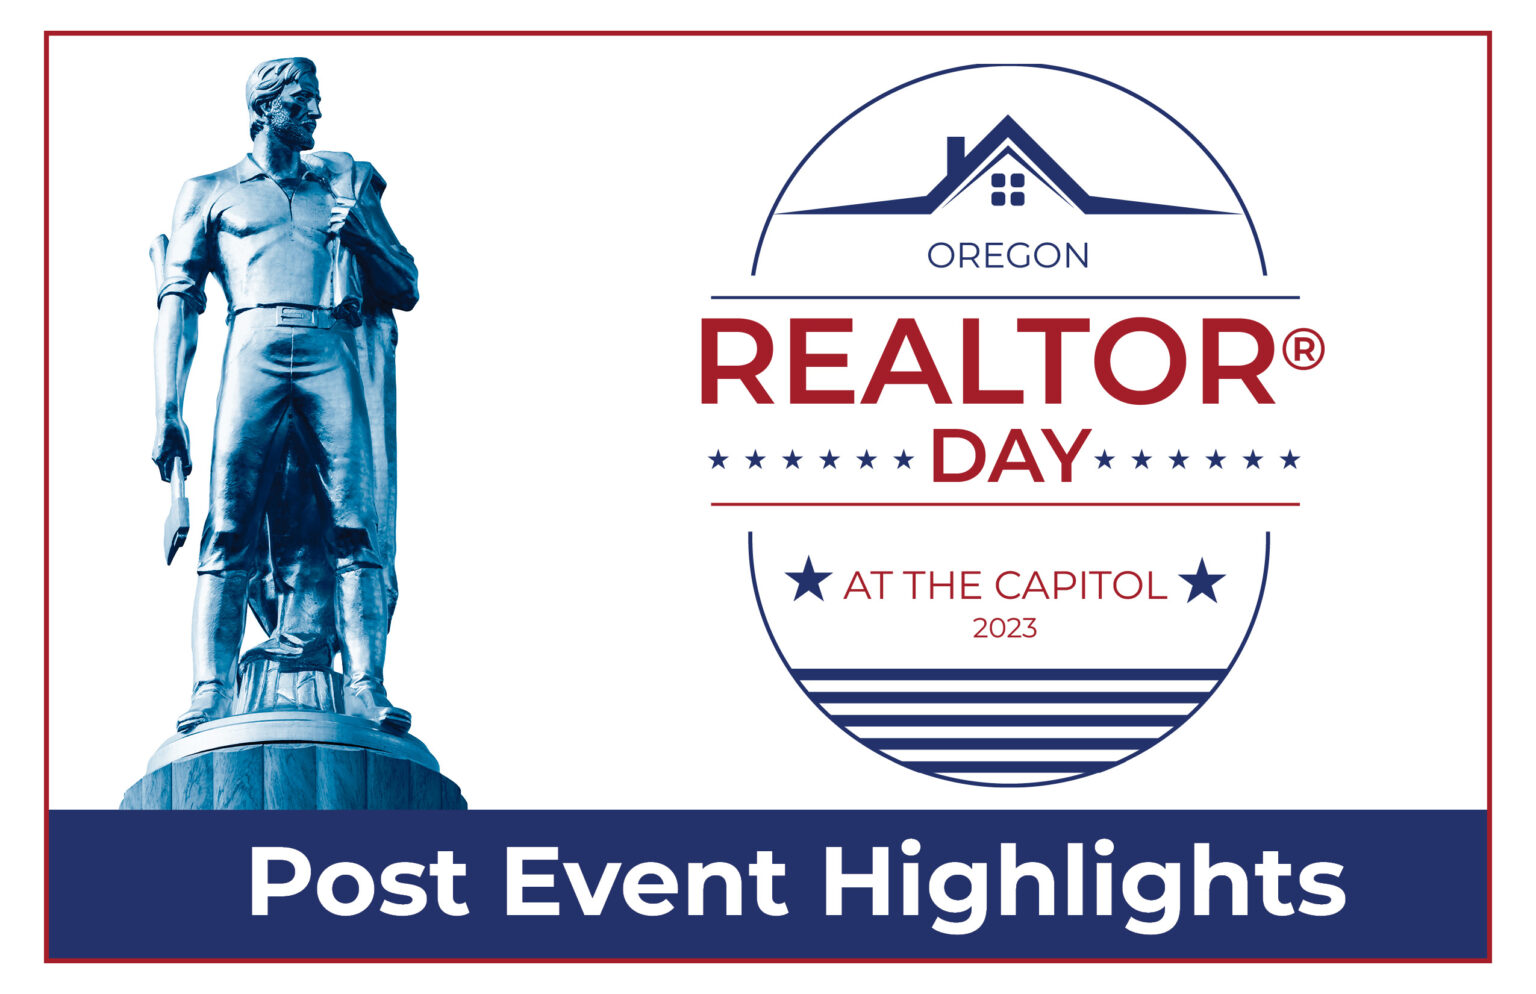 REALTOR® Day at the Capitol